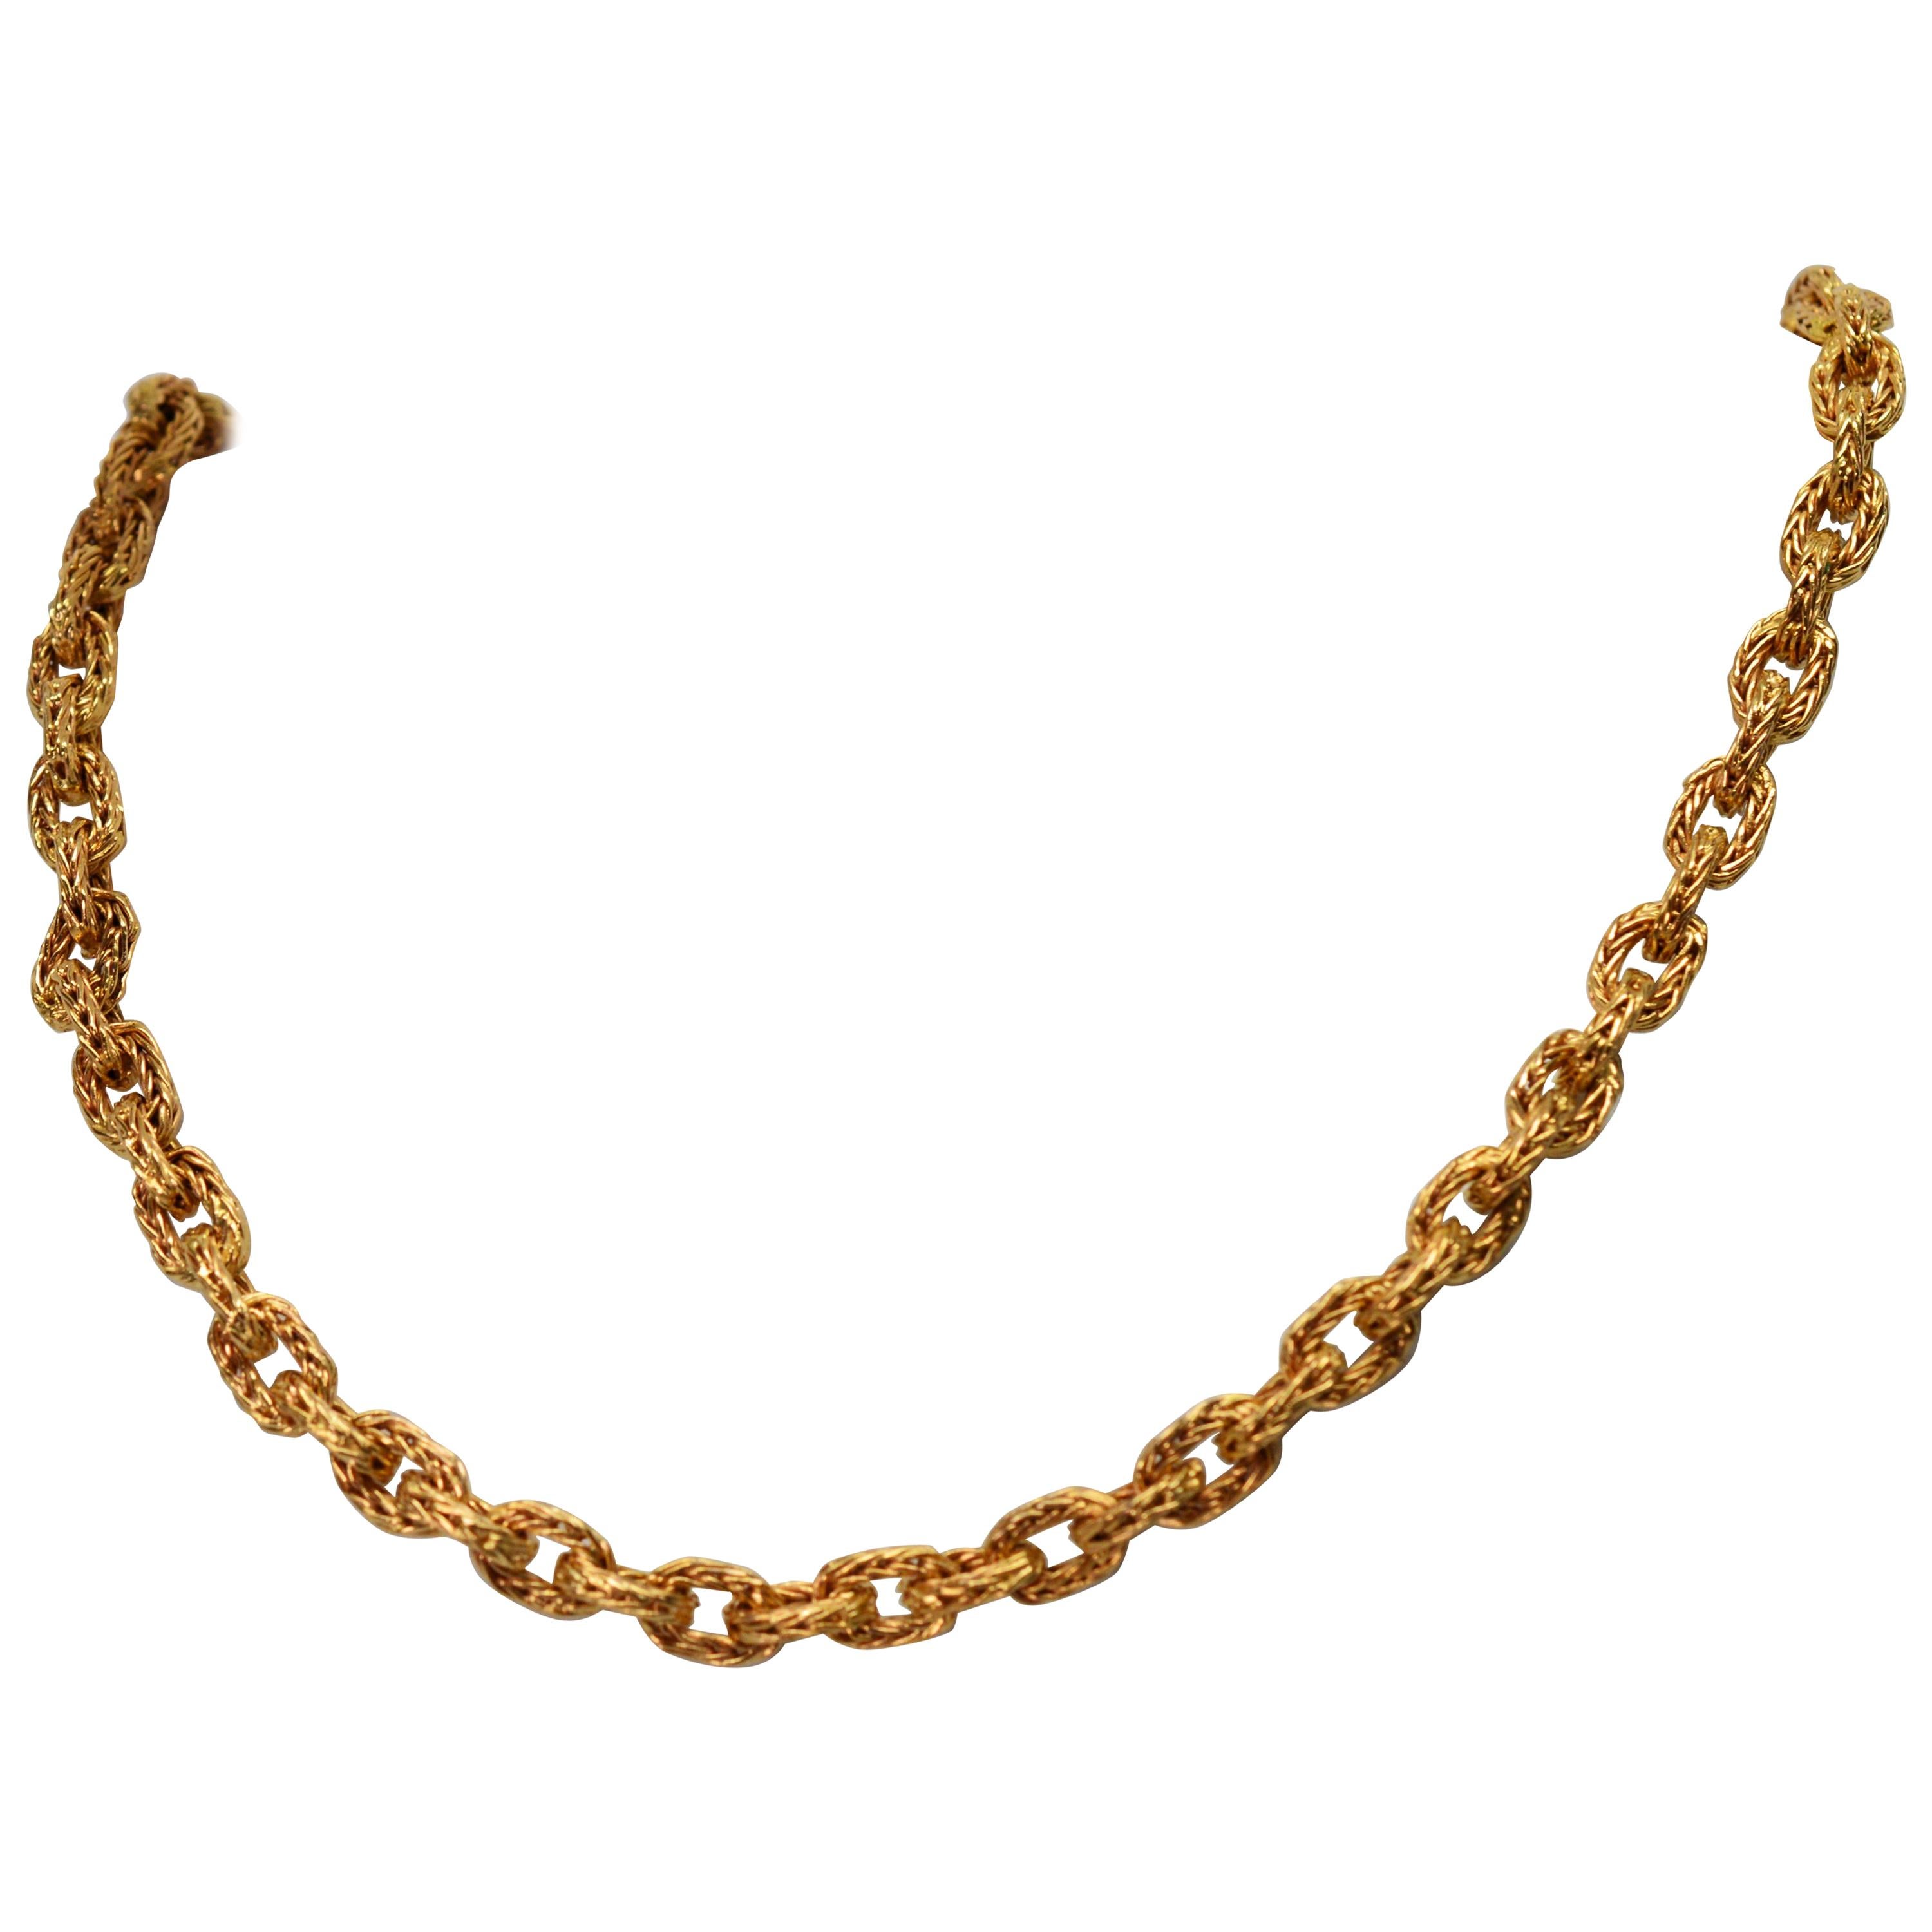 18 Karat Yellow Gold Italian Woven Rustic Link Cable Chain Necklace